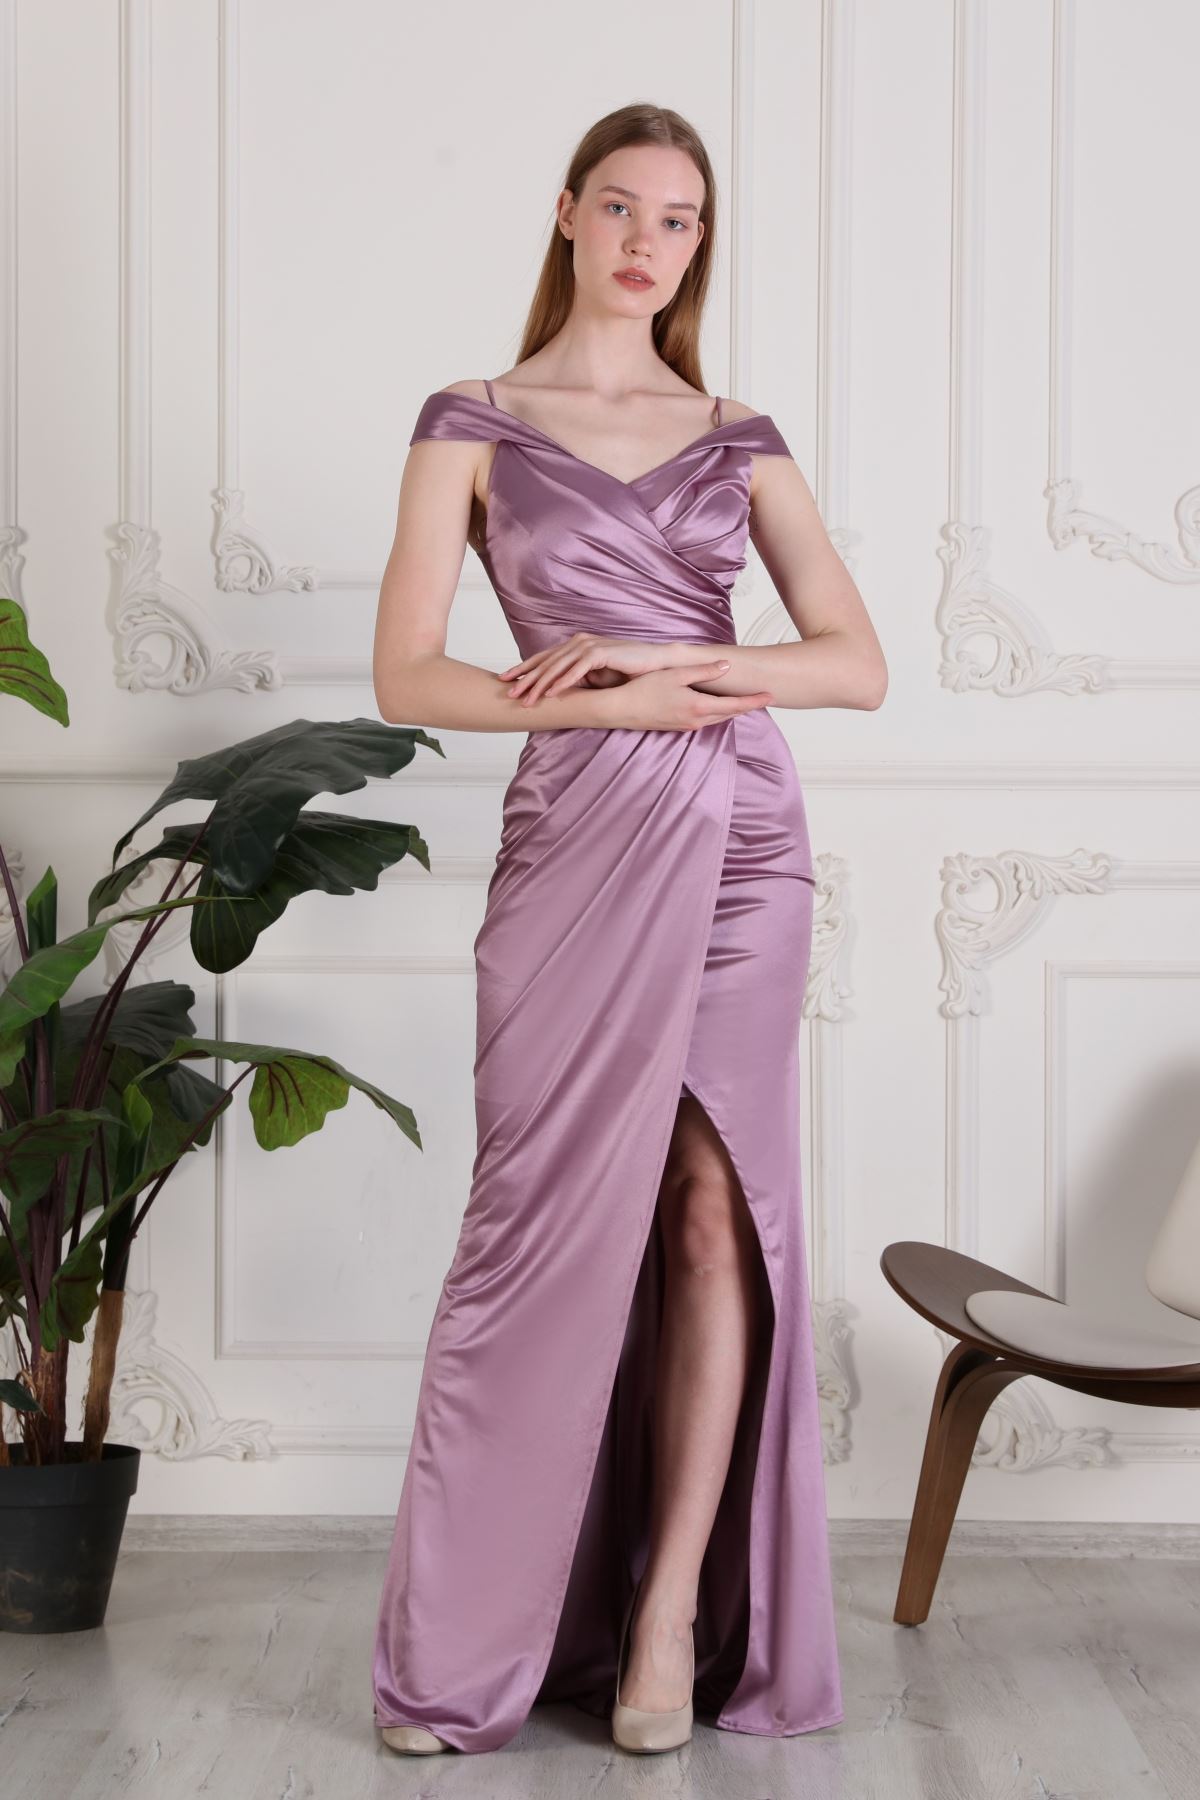 Low Sleeve Women's Evening Dresses with Slit I Straps